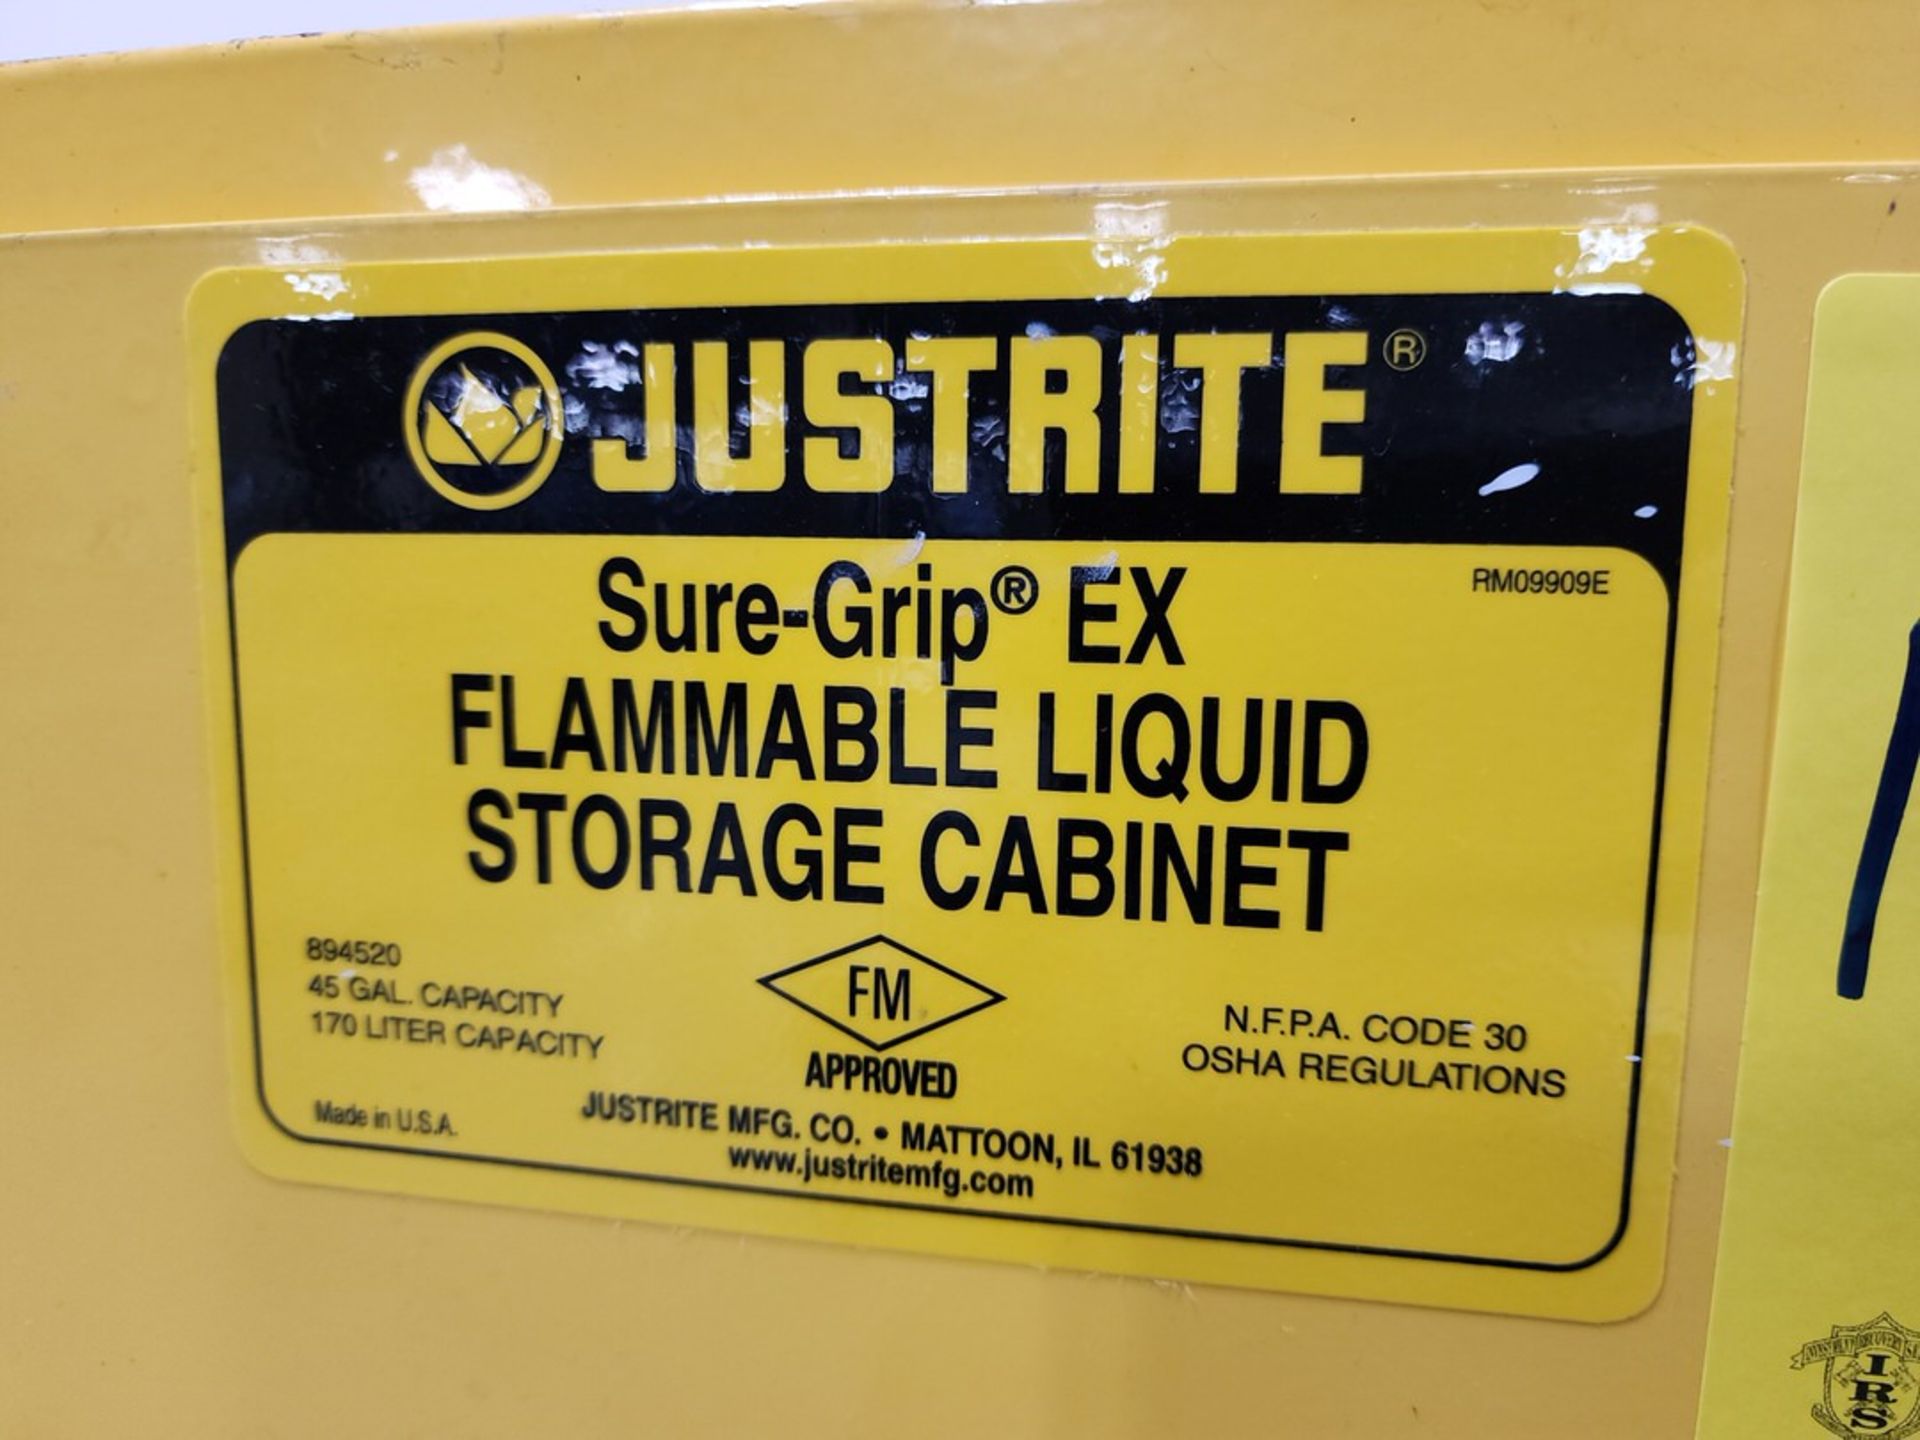 Just-Rite 45gal Flammable Cabinet - Image 3 of 3